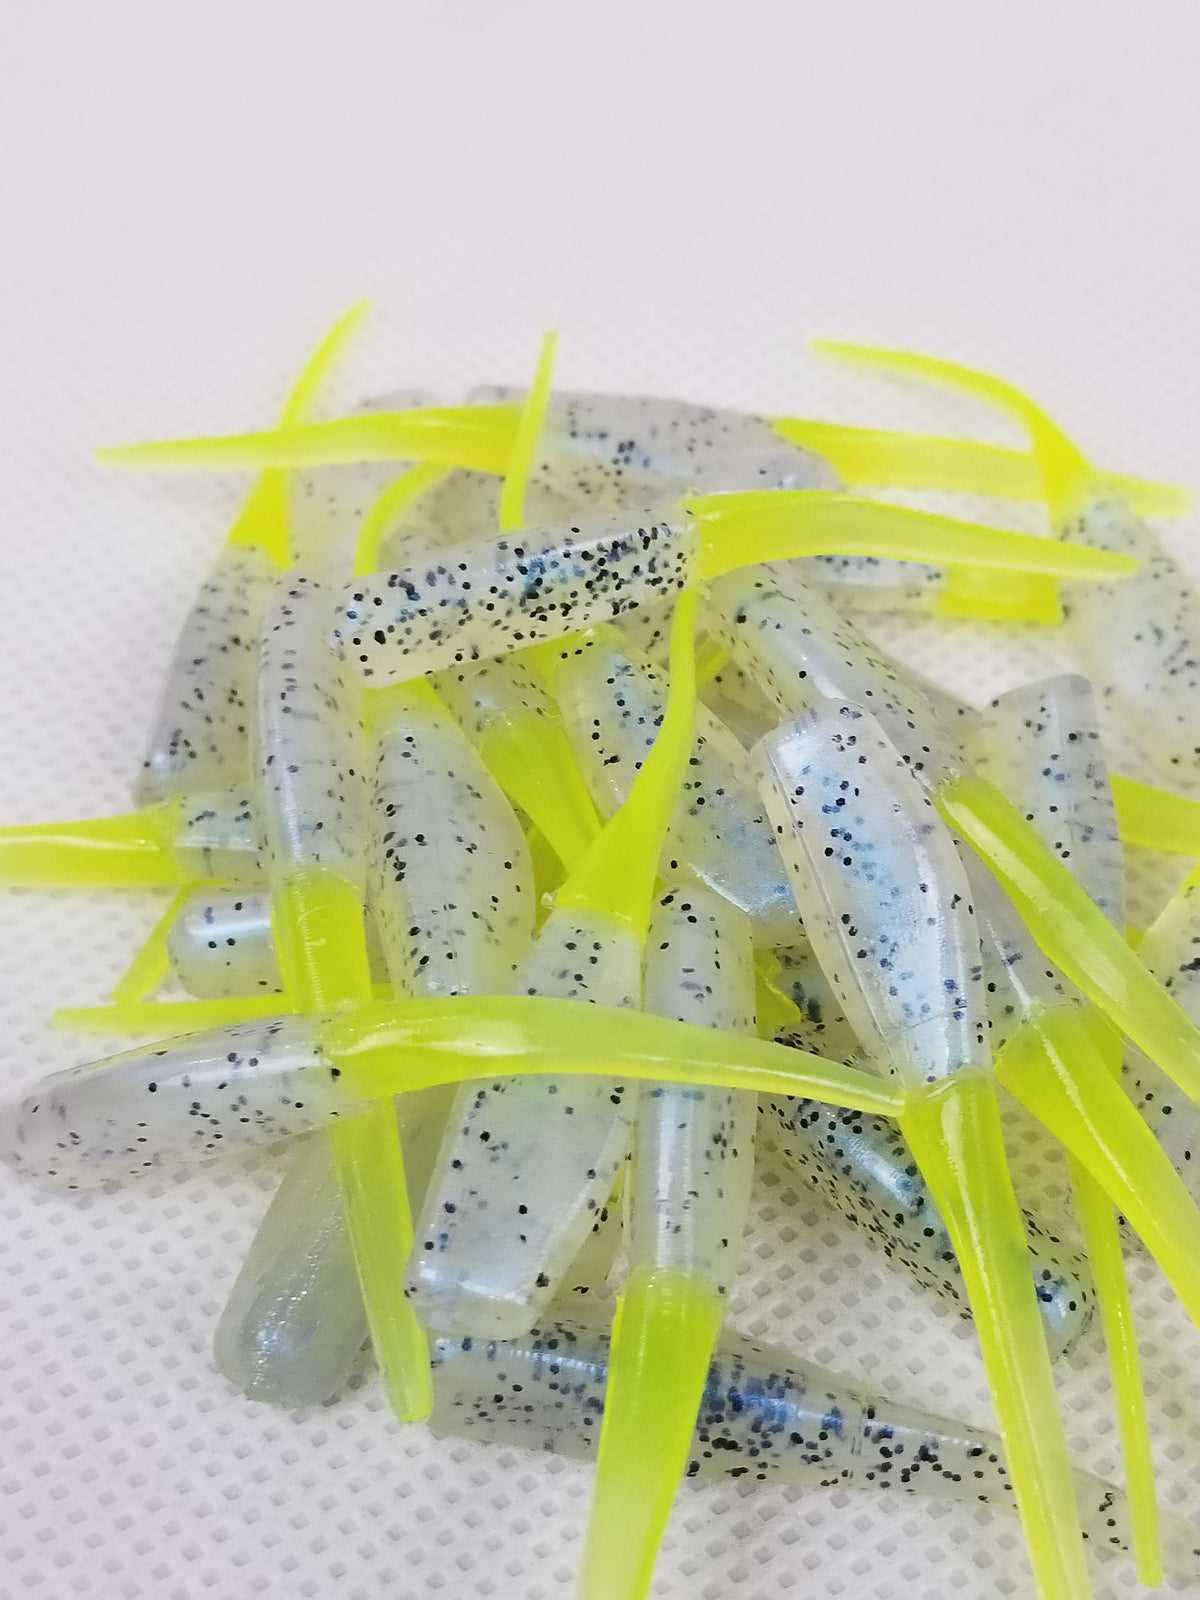 Cam's 2" Stinger Shad 40pc Spring Monkey Milk & Chartreuse Tail Crappie Soft Jigs [A Cam's Exclusive]